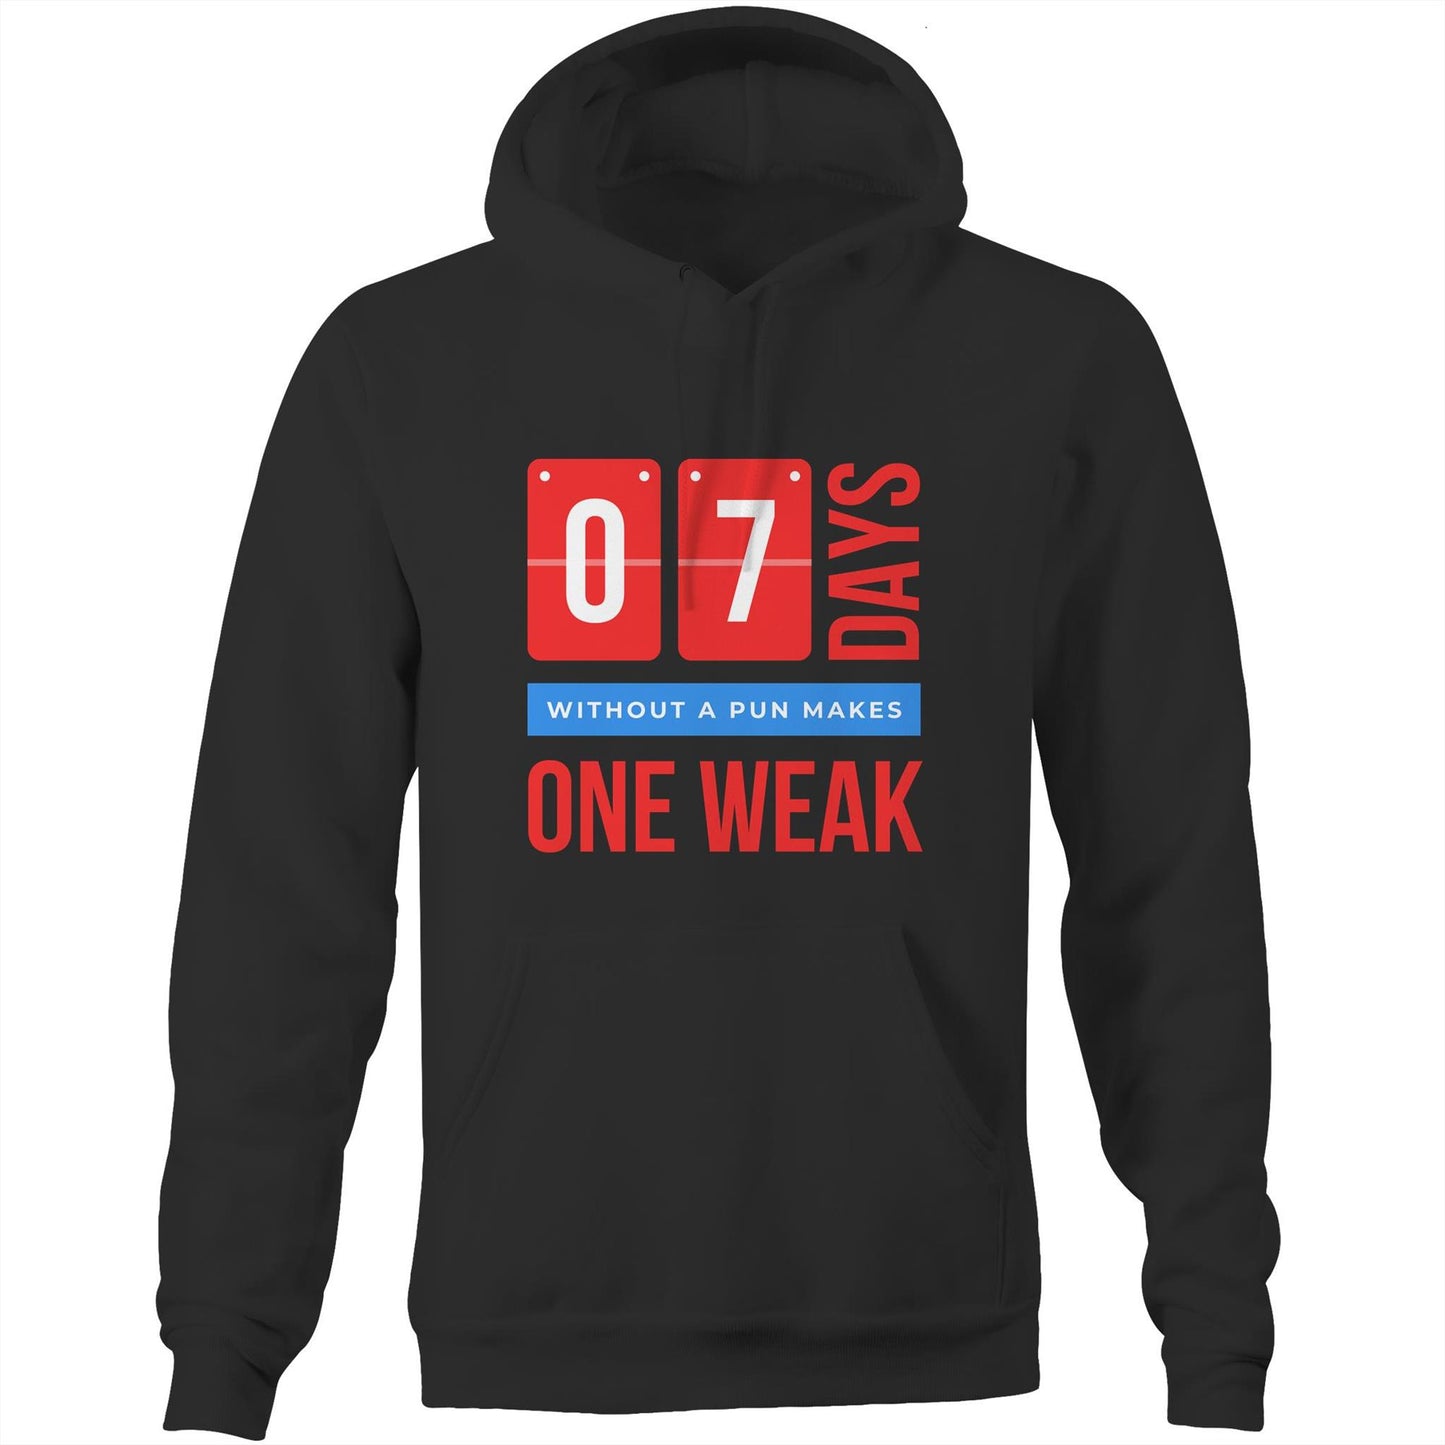 7 Days Without A Pun - Pocket Hoodie Sweatshirt Black Heavyweight Hoodie Funny